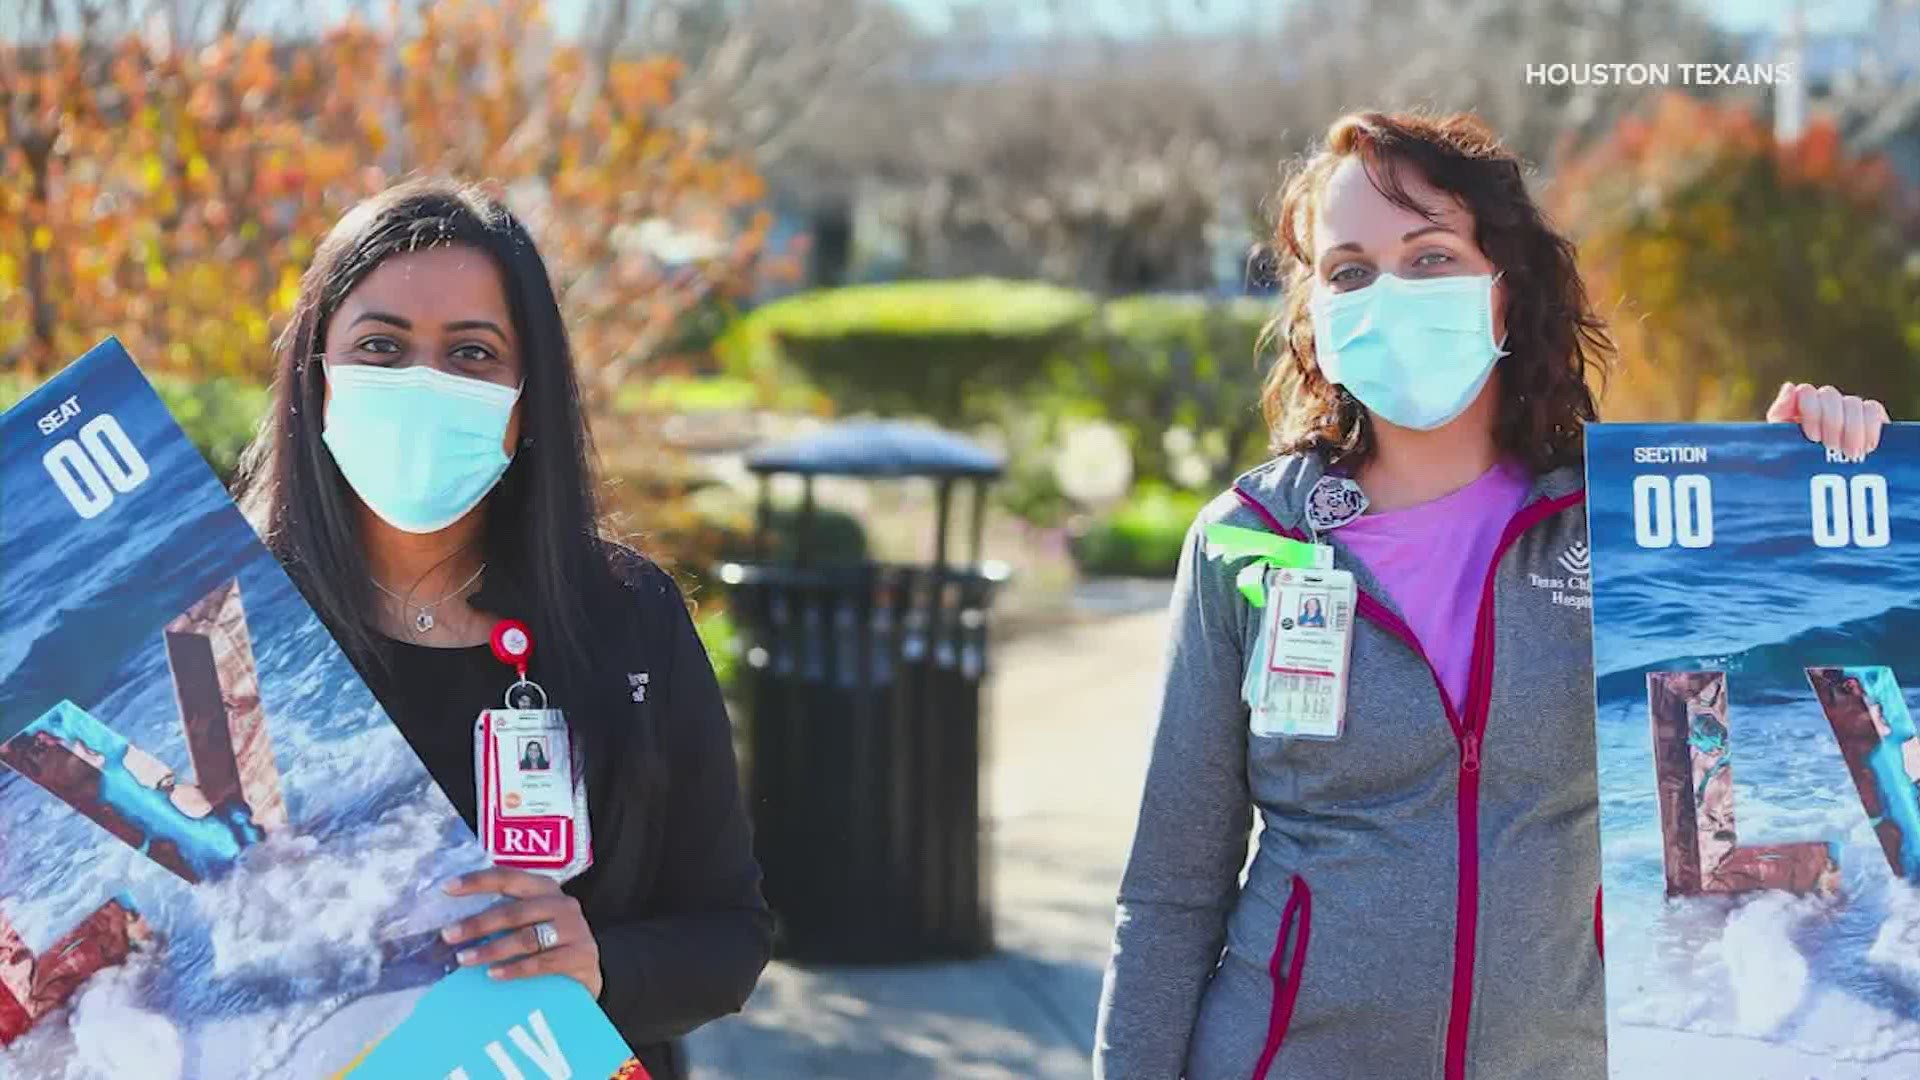 Some healthcare heroes in Houston were selected for a trip to Super Bowl LV where they will be honored for their efforts during the pandemic.